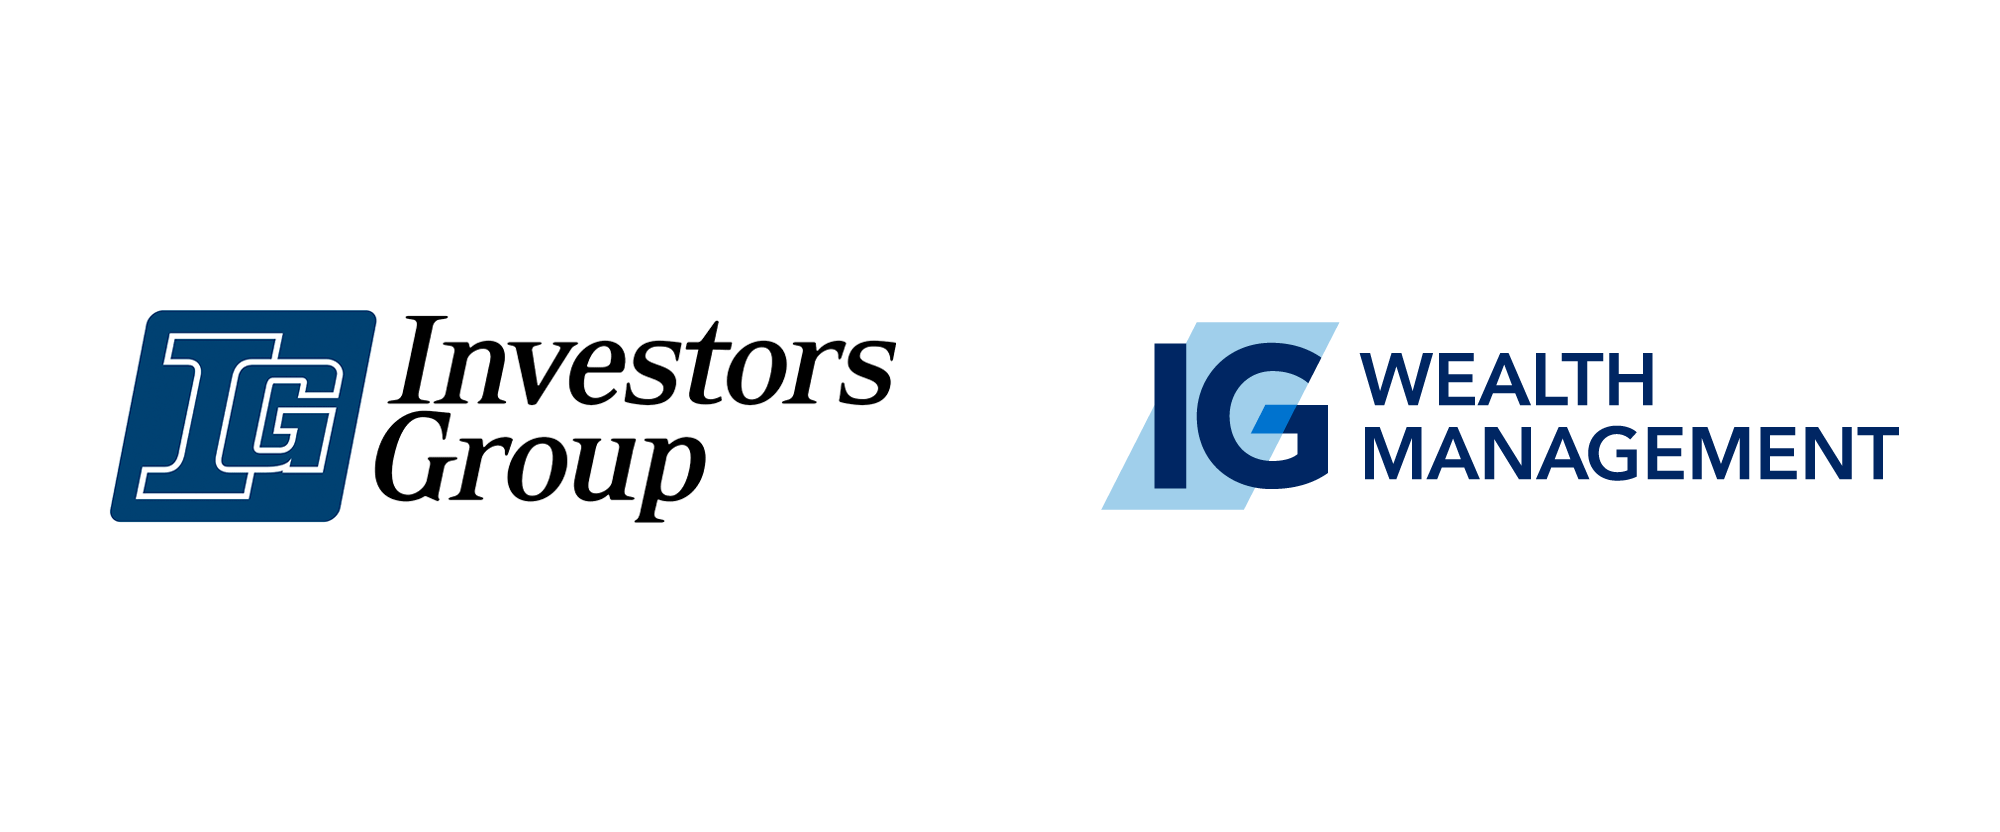 Wealth Logo - Brand New: New Name and Logo for IG Wealth Management